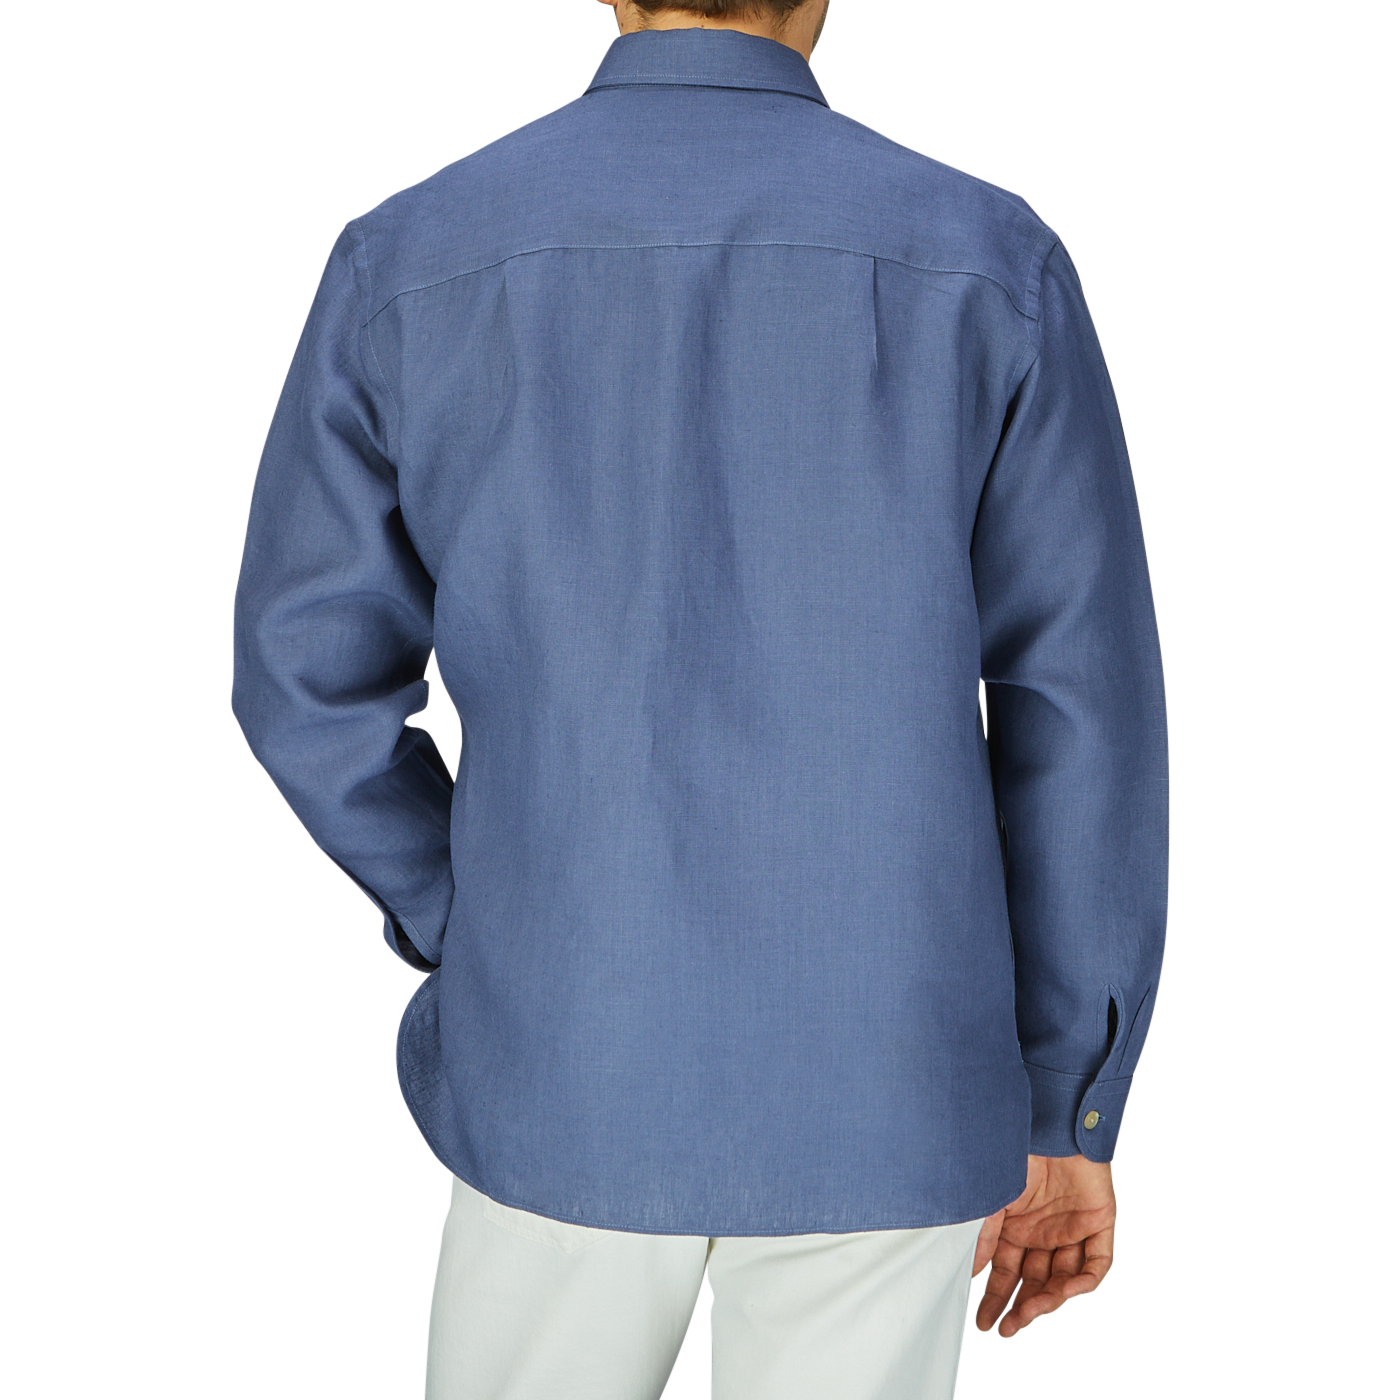 Back view of a man in a De Bonne Facture Pastel Blue Belgian Linen Two Pocket Overshirt and white pants against a grey background.